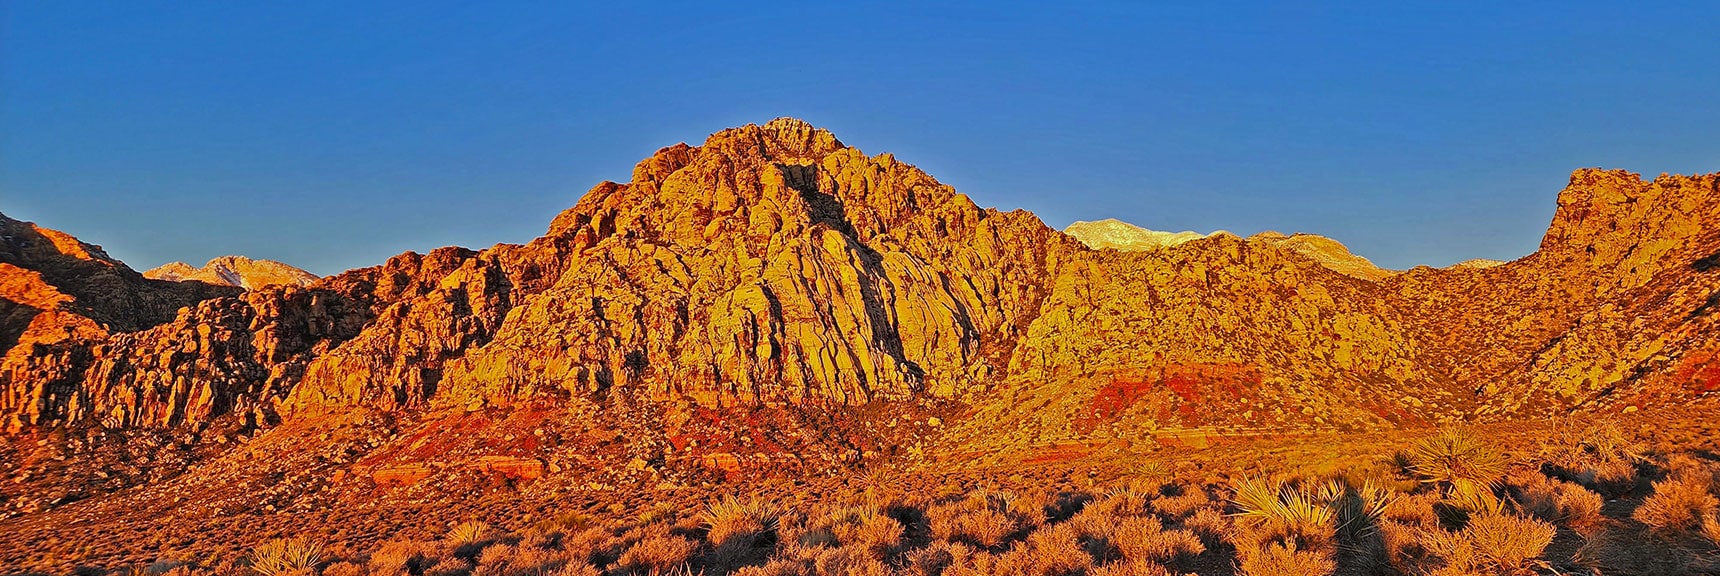 White Rock Mountain Colored by the Sunrise | White Rock Mountain Loop Trail | Red Rock Canyon, Nevada